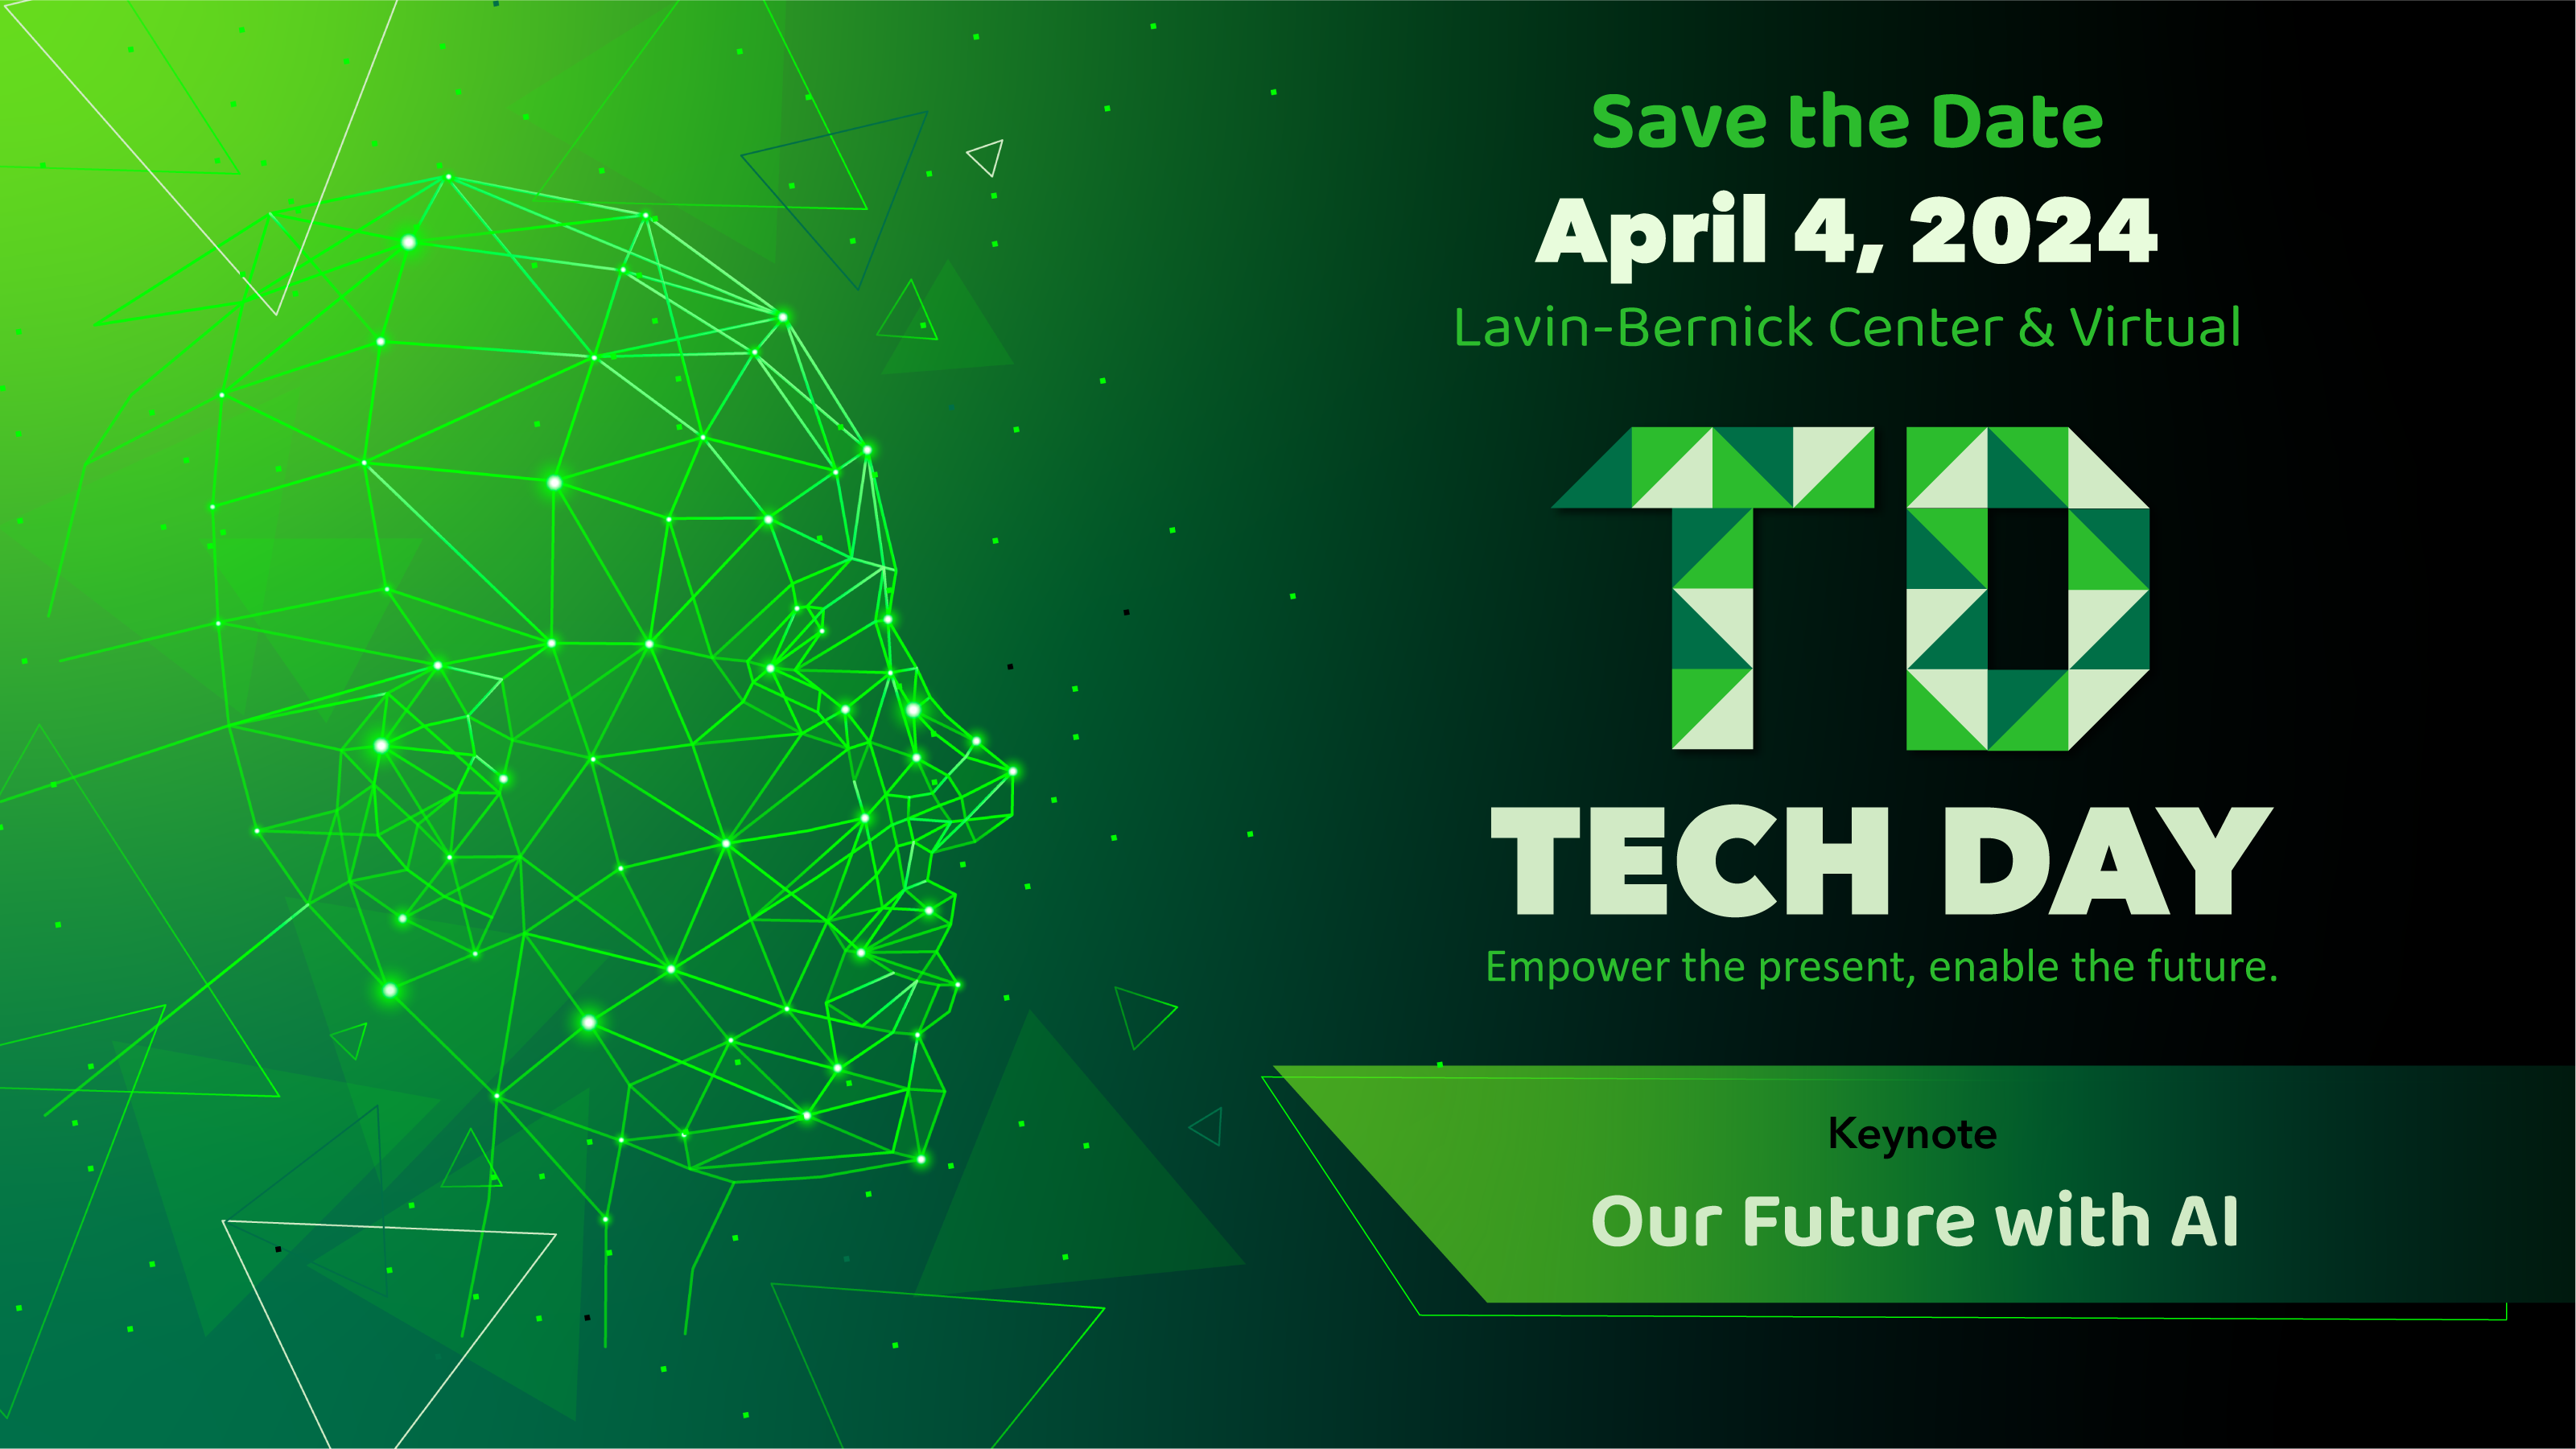 tech day our future with AI save the date april 4 2024 logo